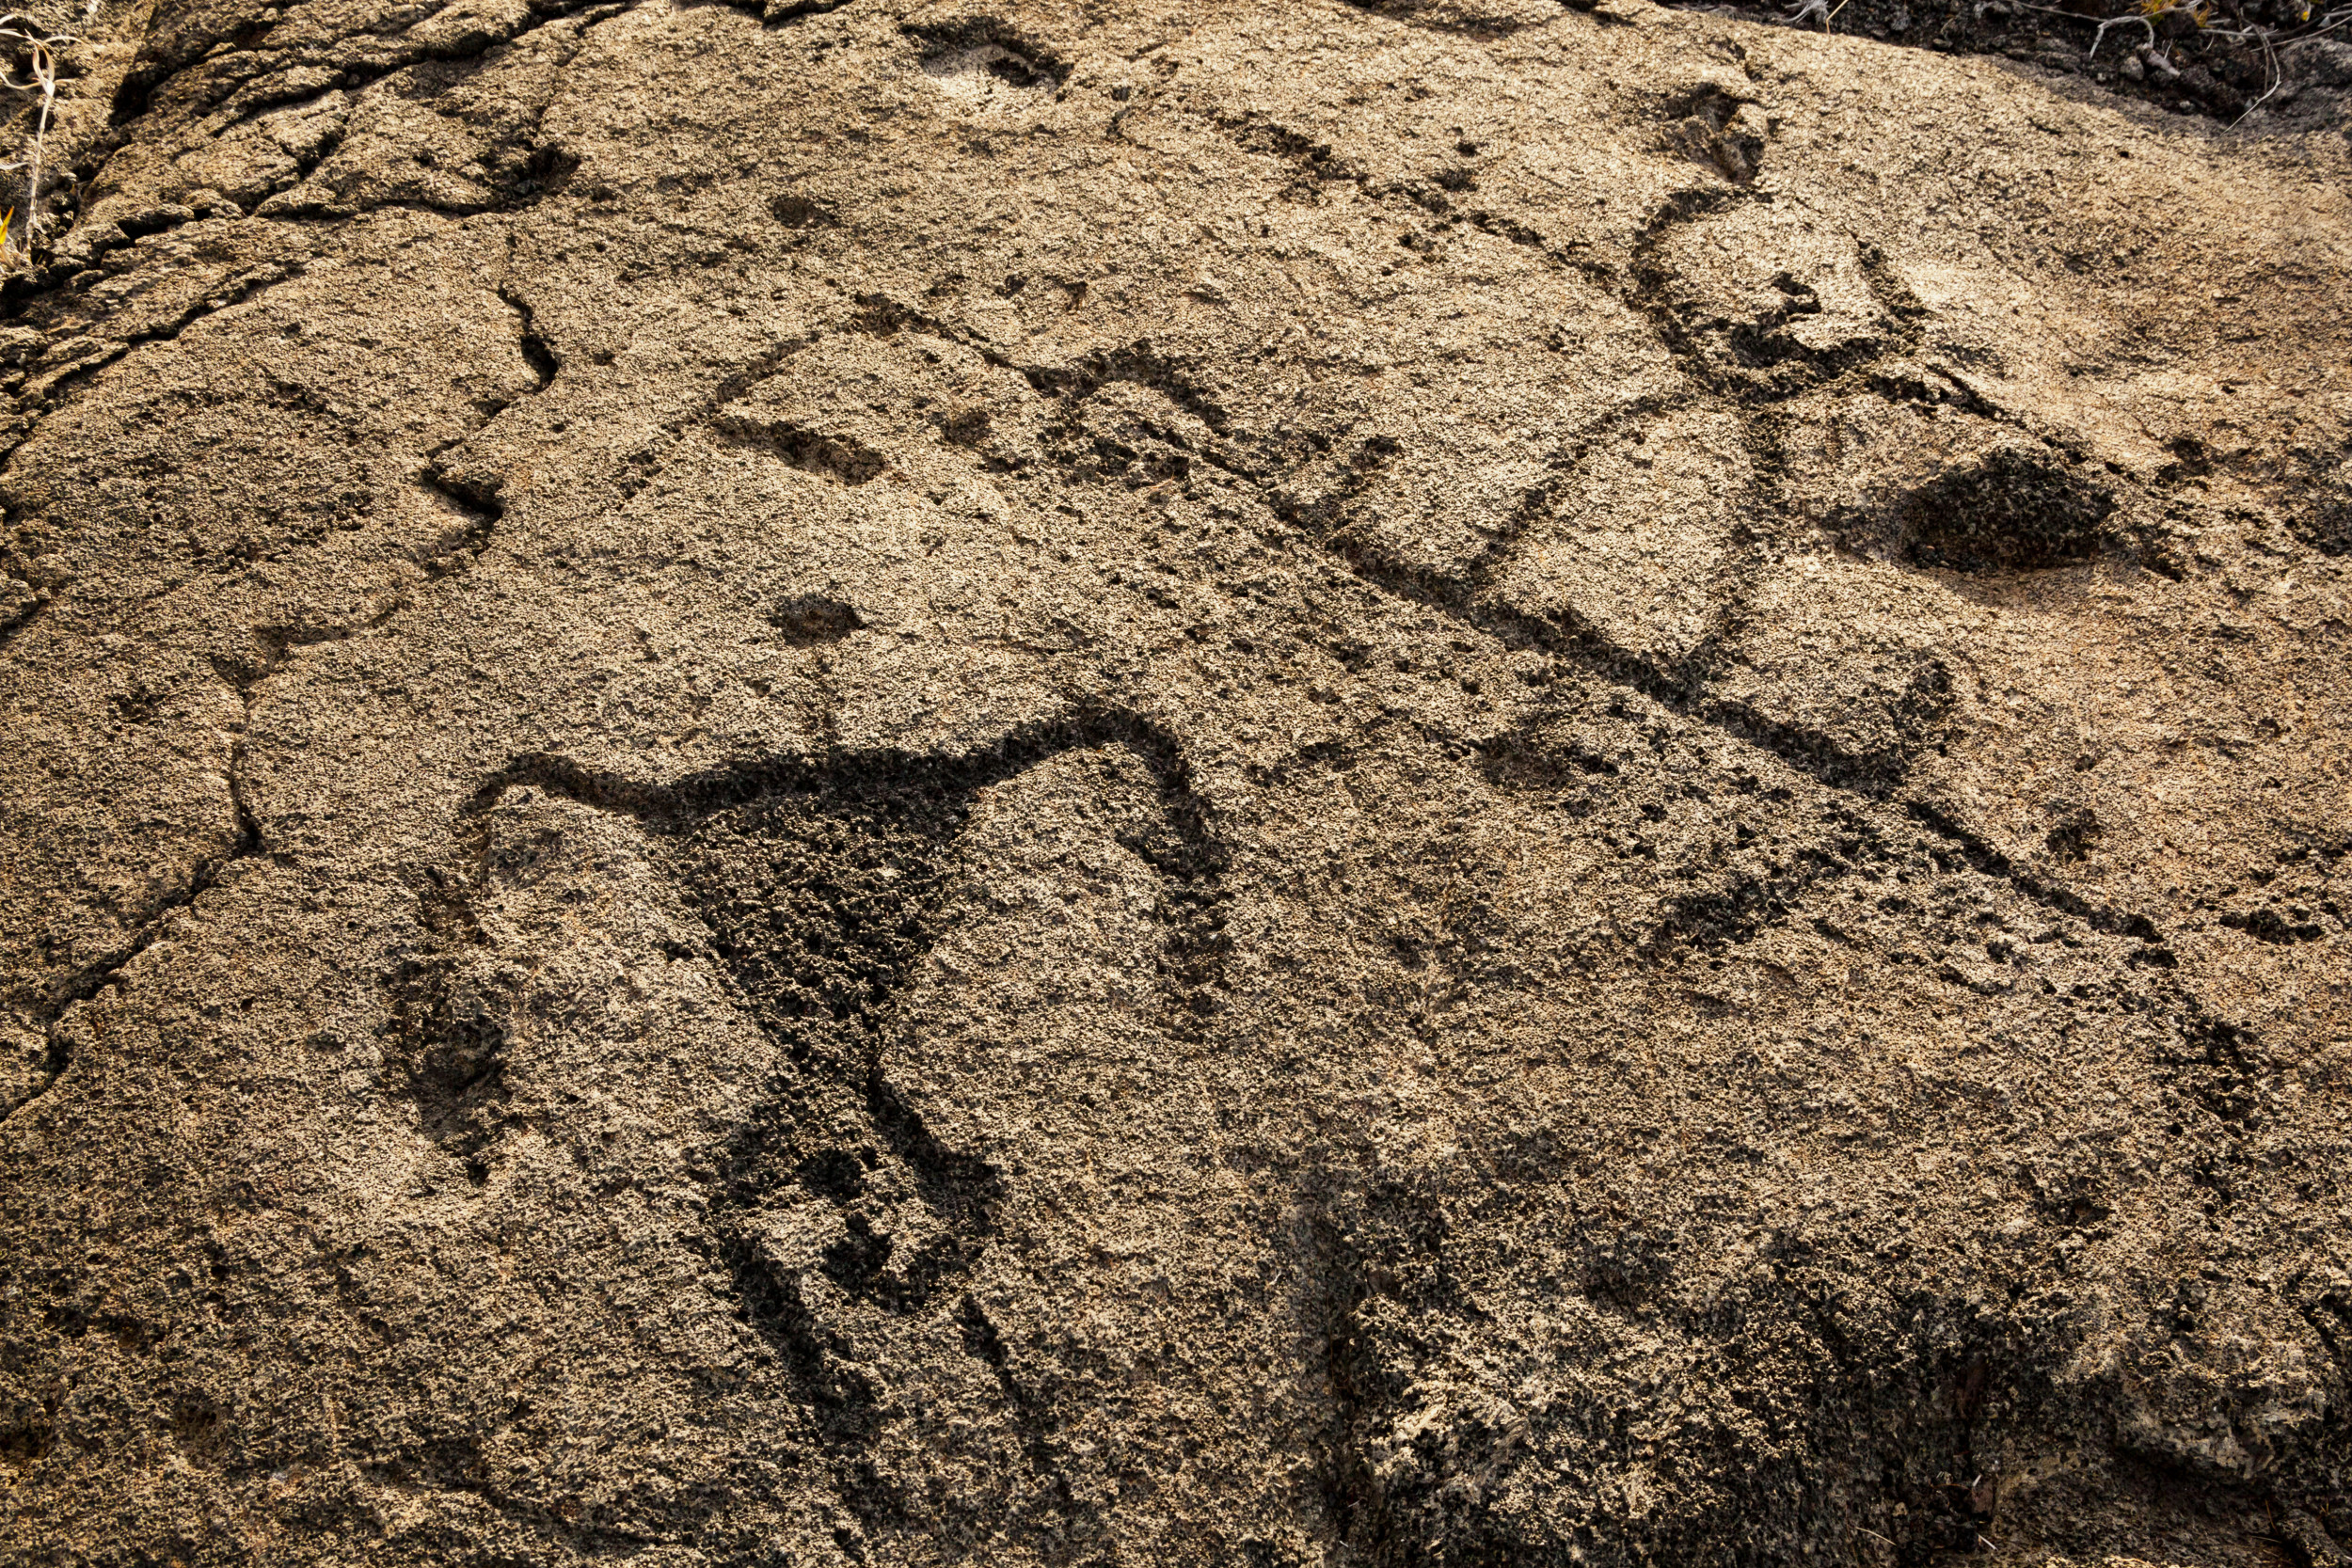 Ancient Drawings Revealed Beneath Hawaii Sand